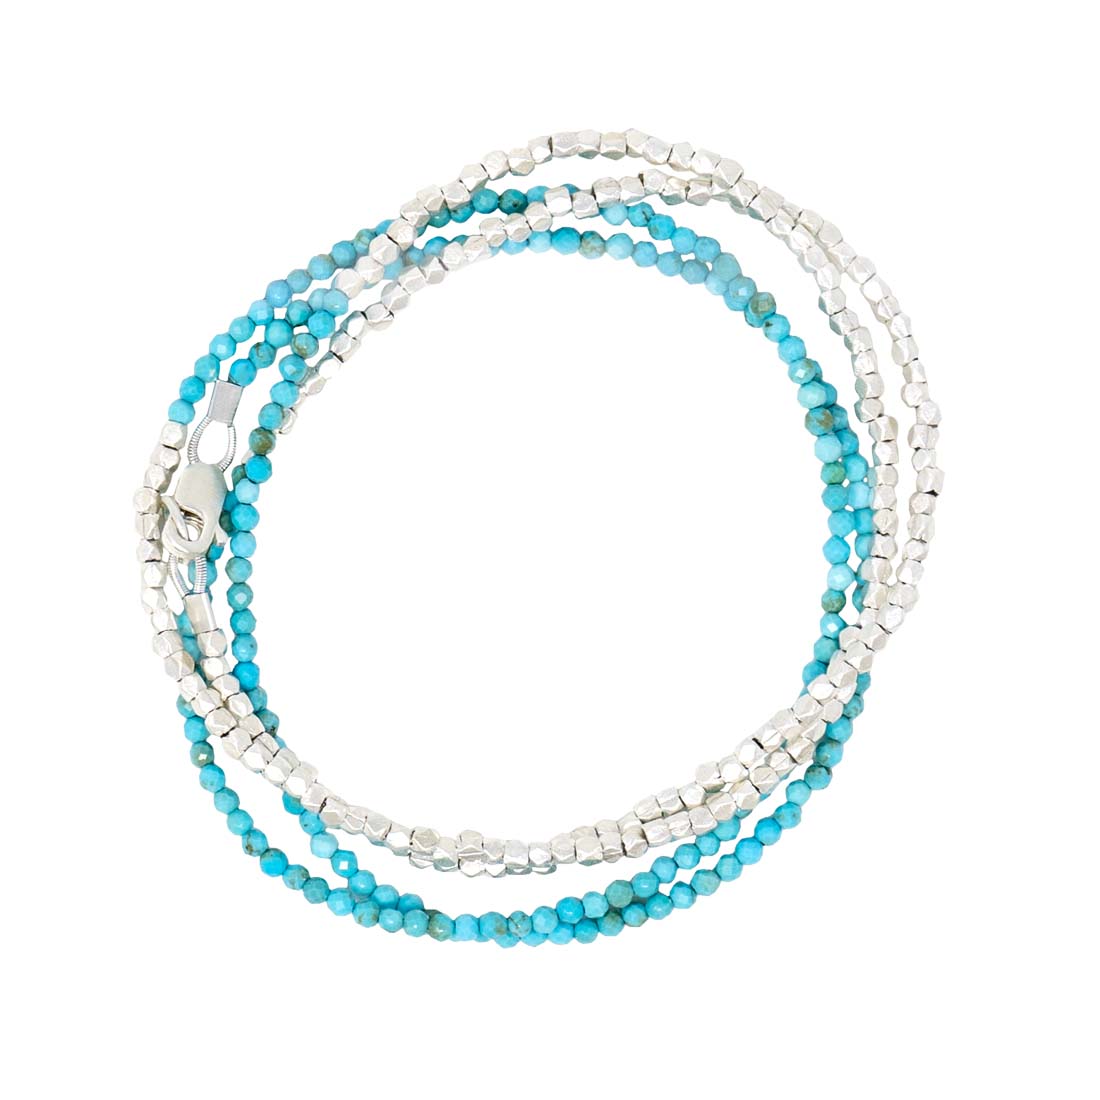 Sterling Silver Turquoise Beads Wrap Bracelet